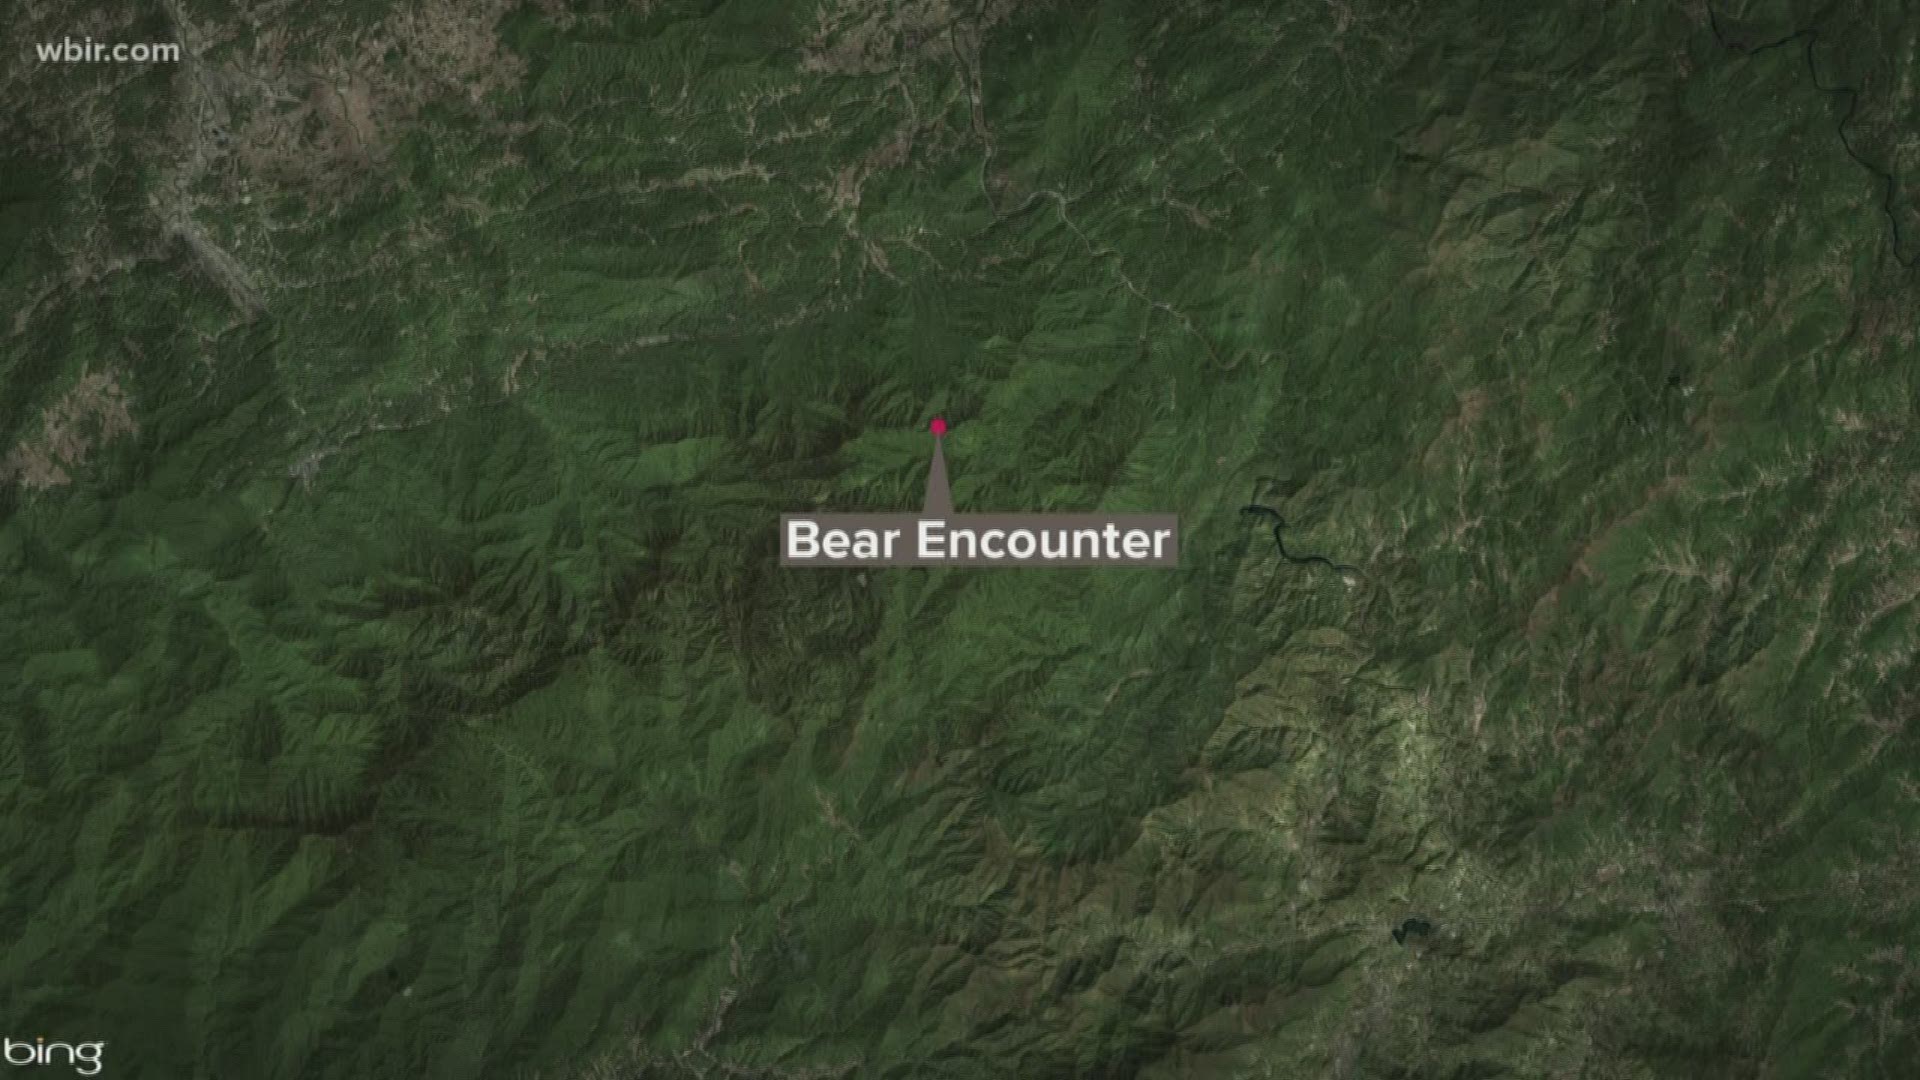 Park rangers say a woman had what they call an "unusual encounter with a bear" in an area of the Smokies that meets with the Appalachian Trail.